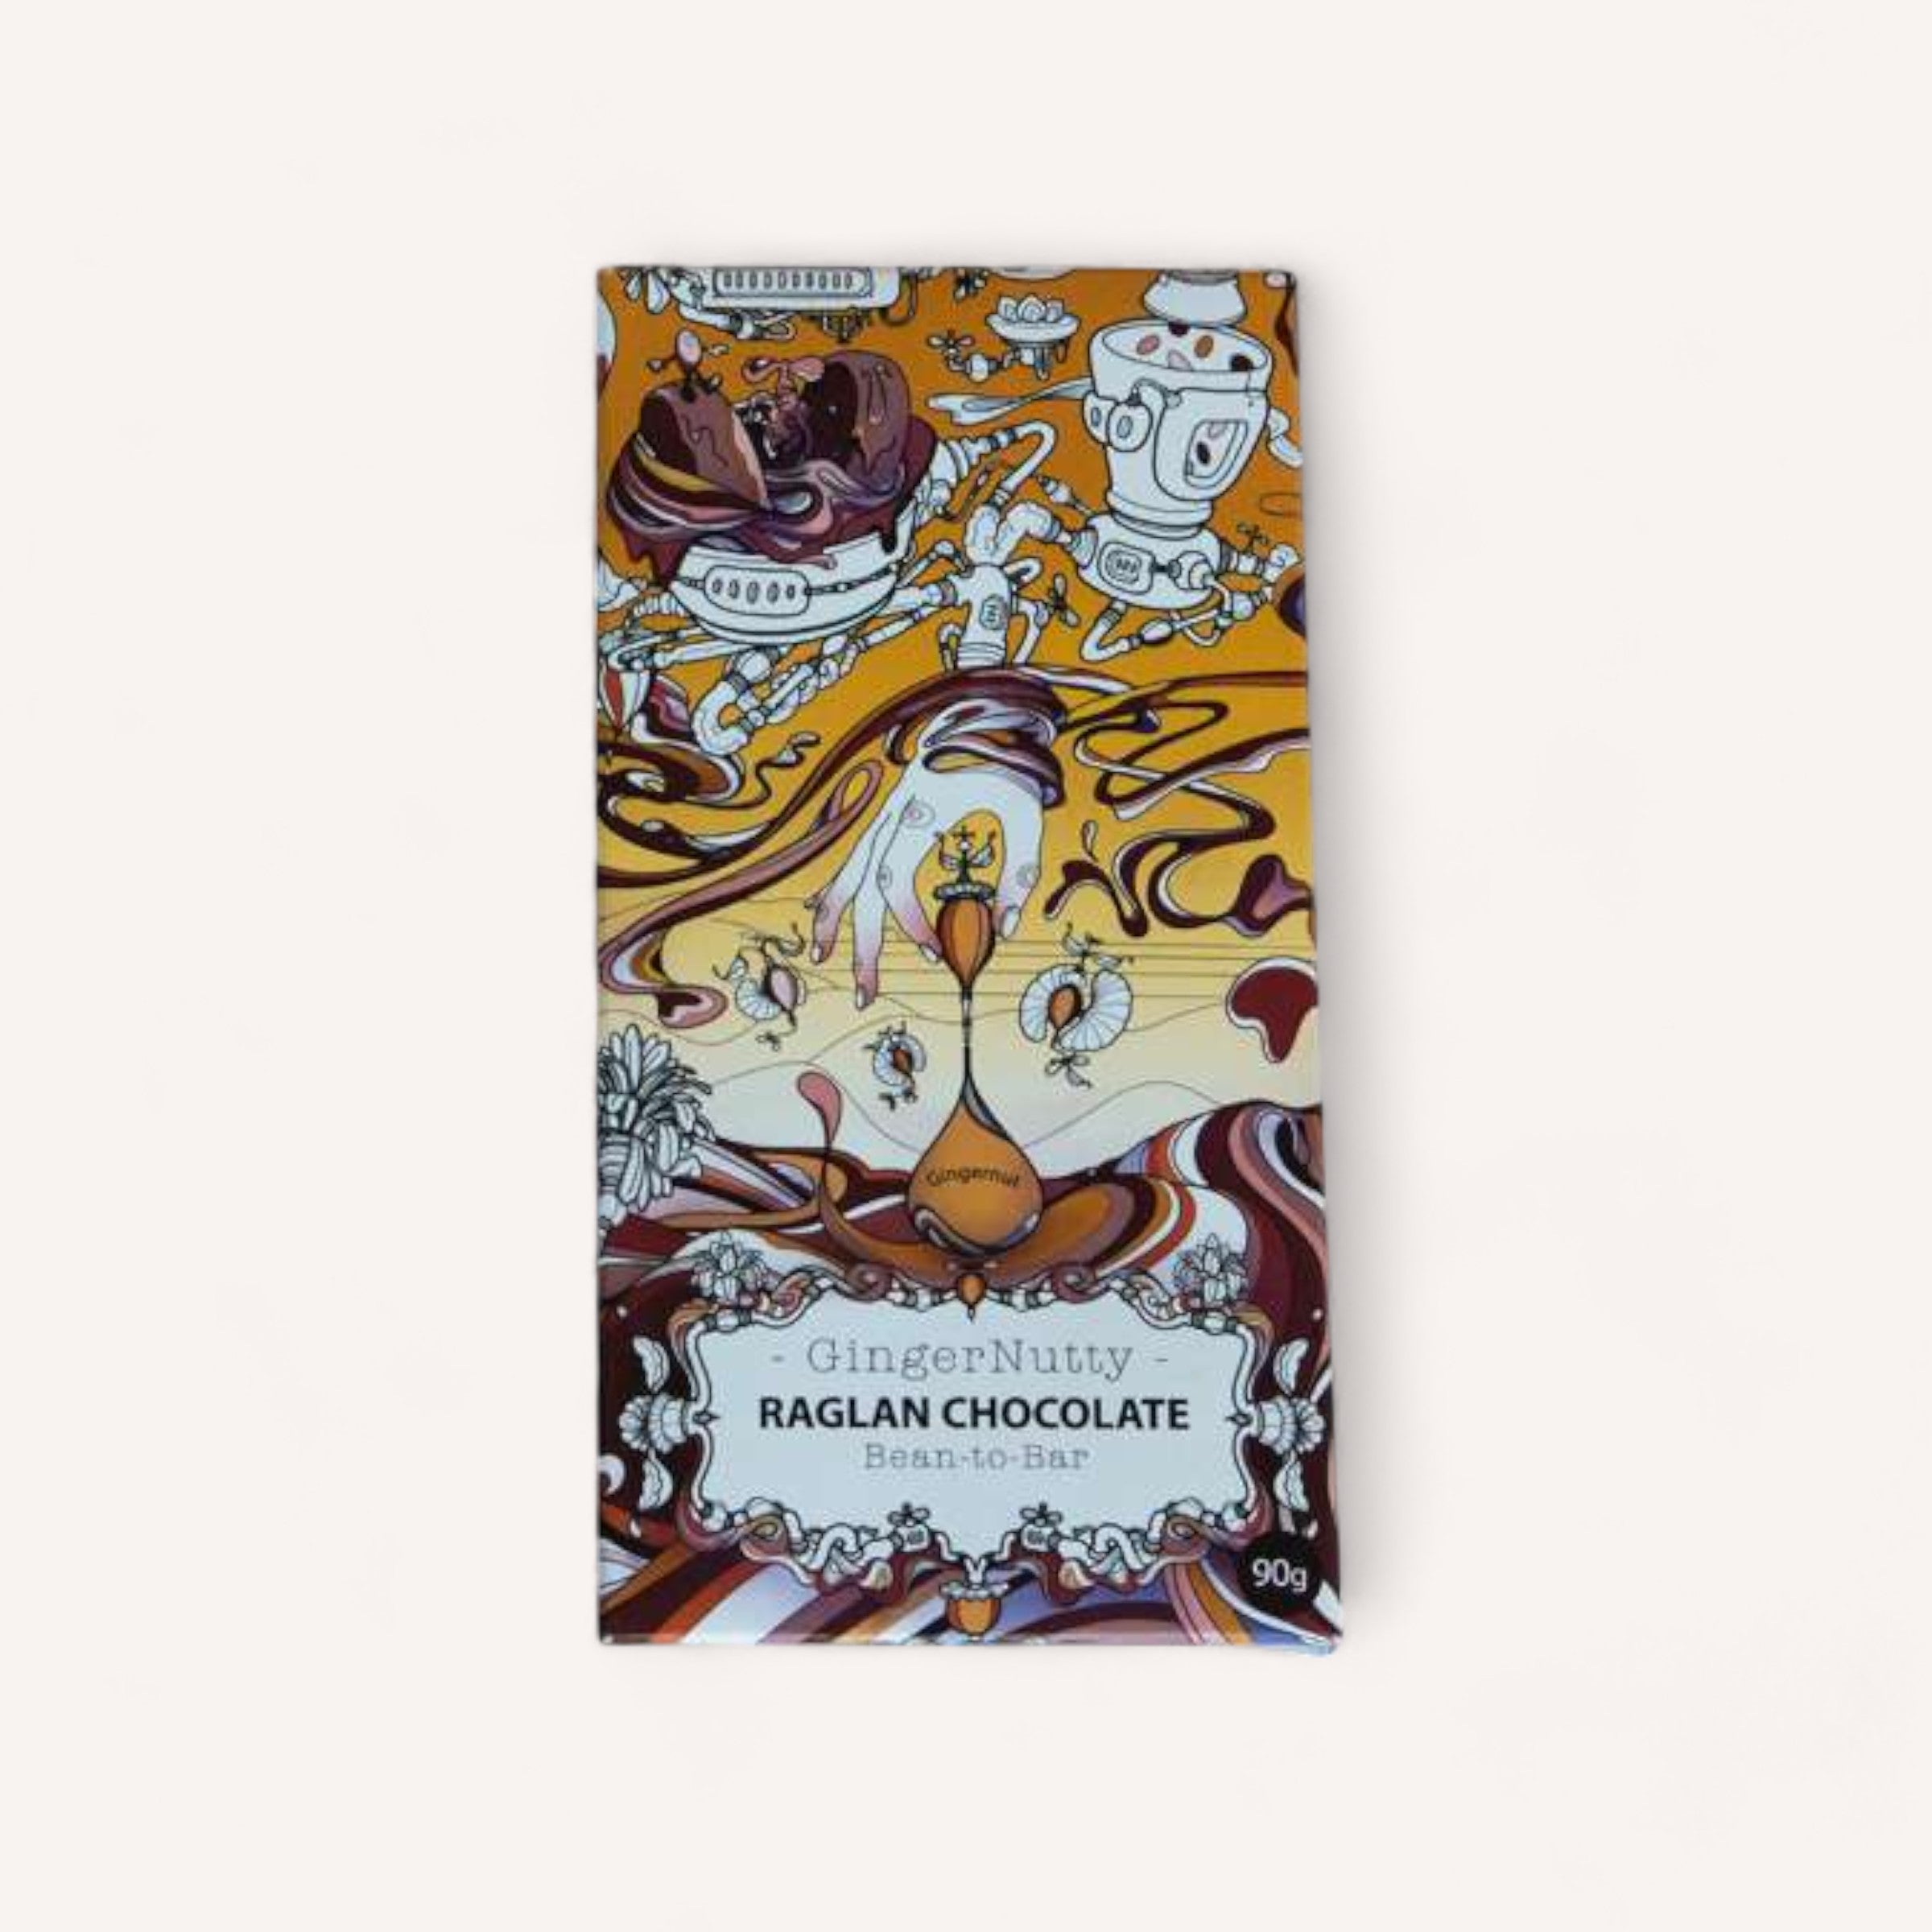 A vibrant organic Raglan Chocolate Ginger Nutty bar wrapper with intricate, whimsical designs featuring character-like drawings and swirls of color.